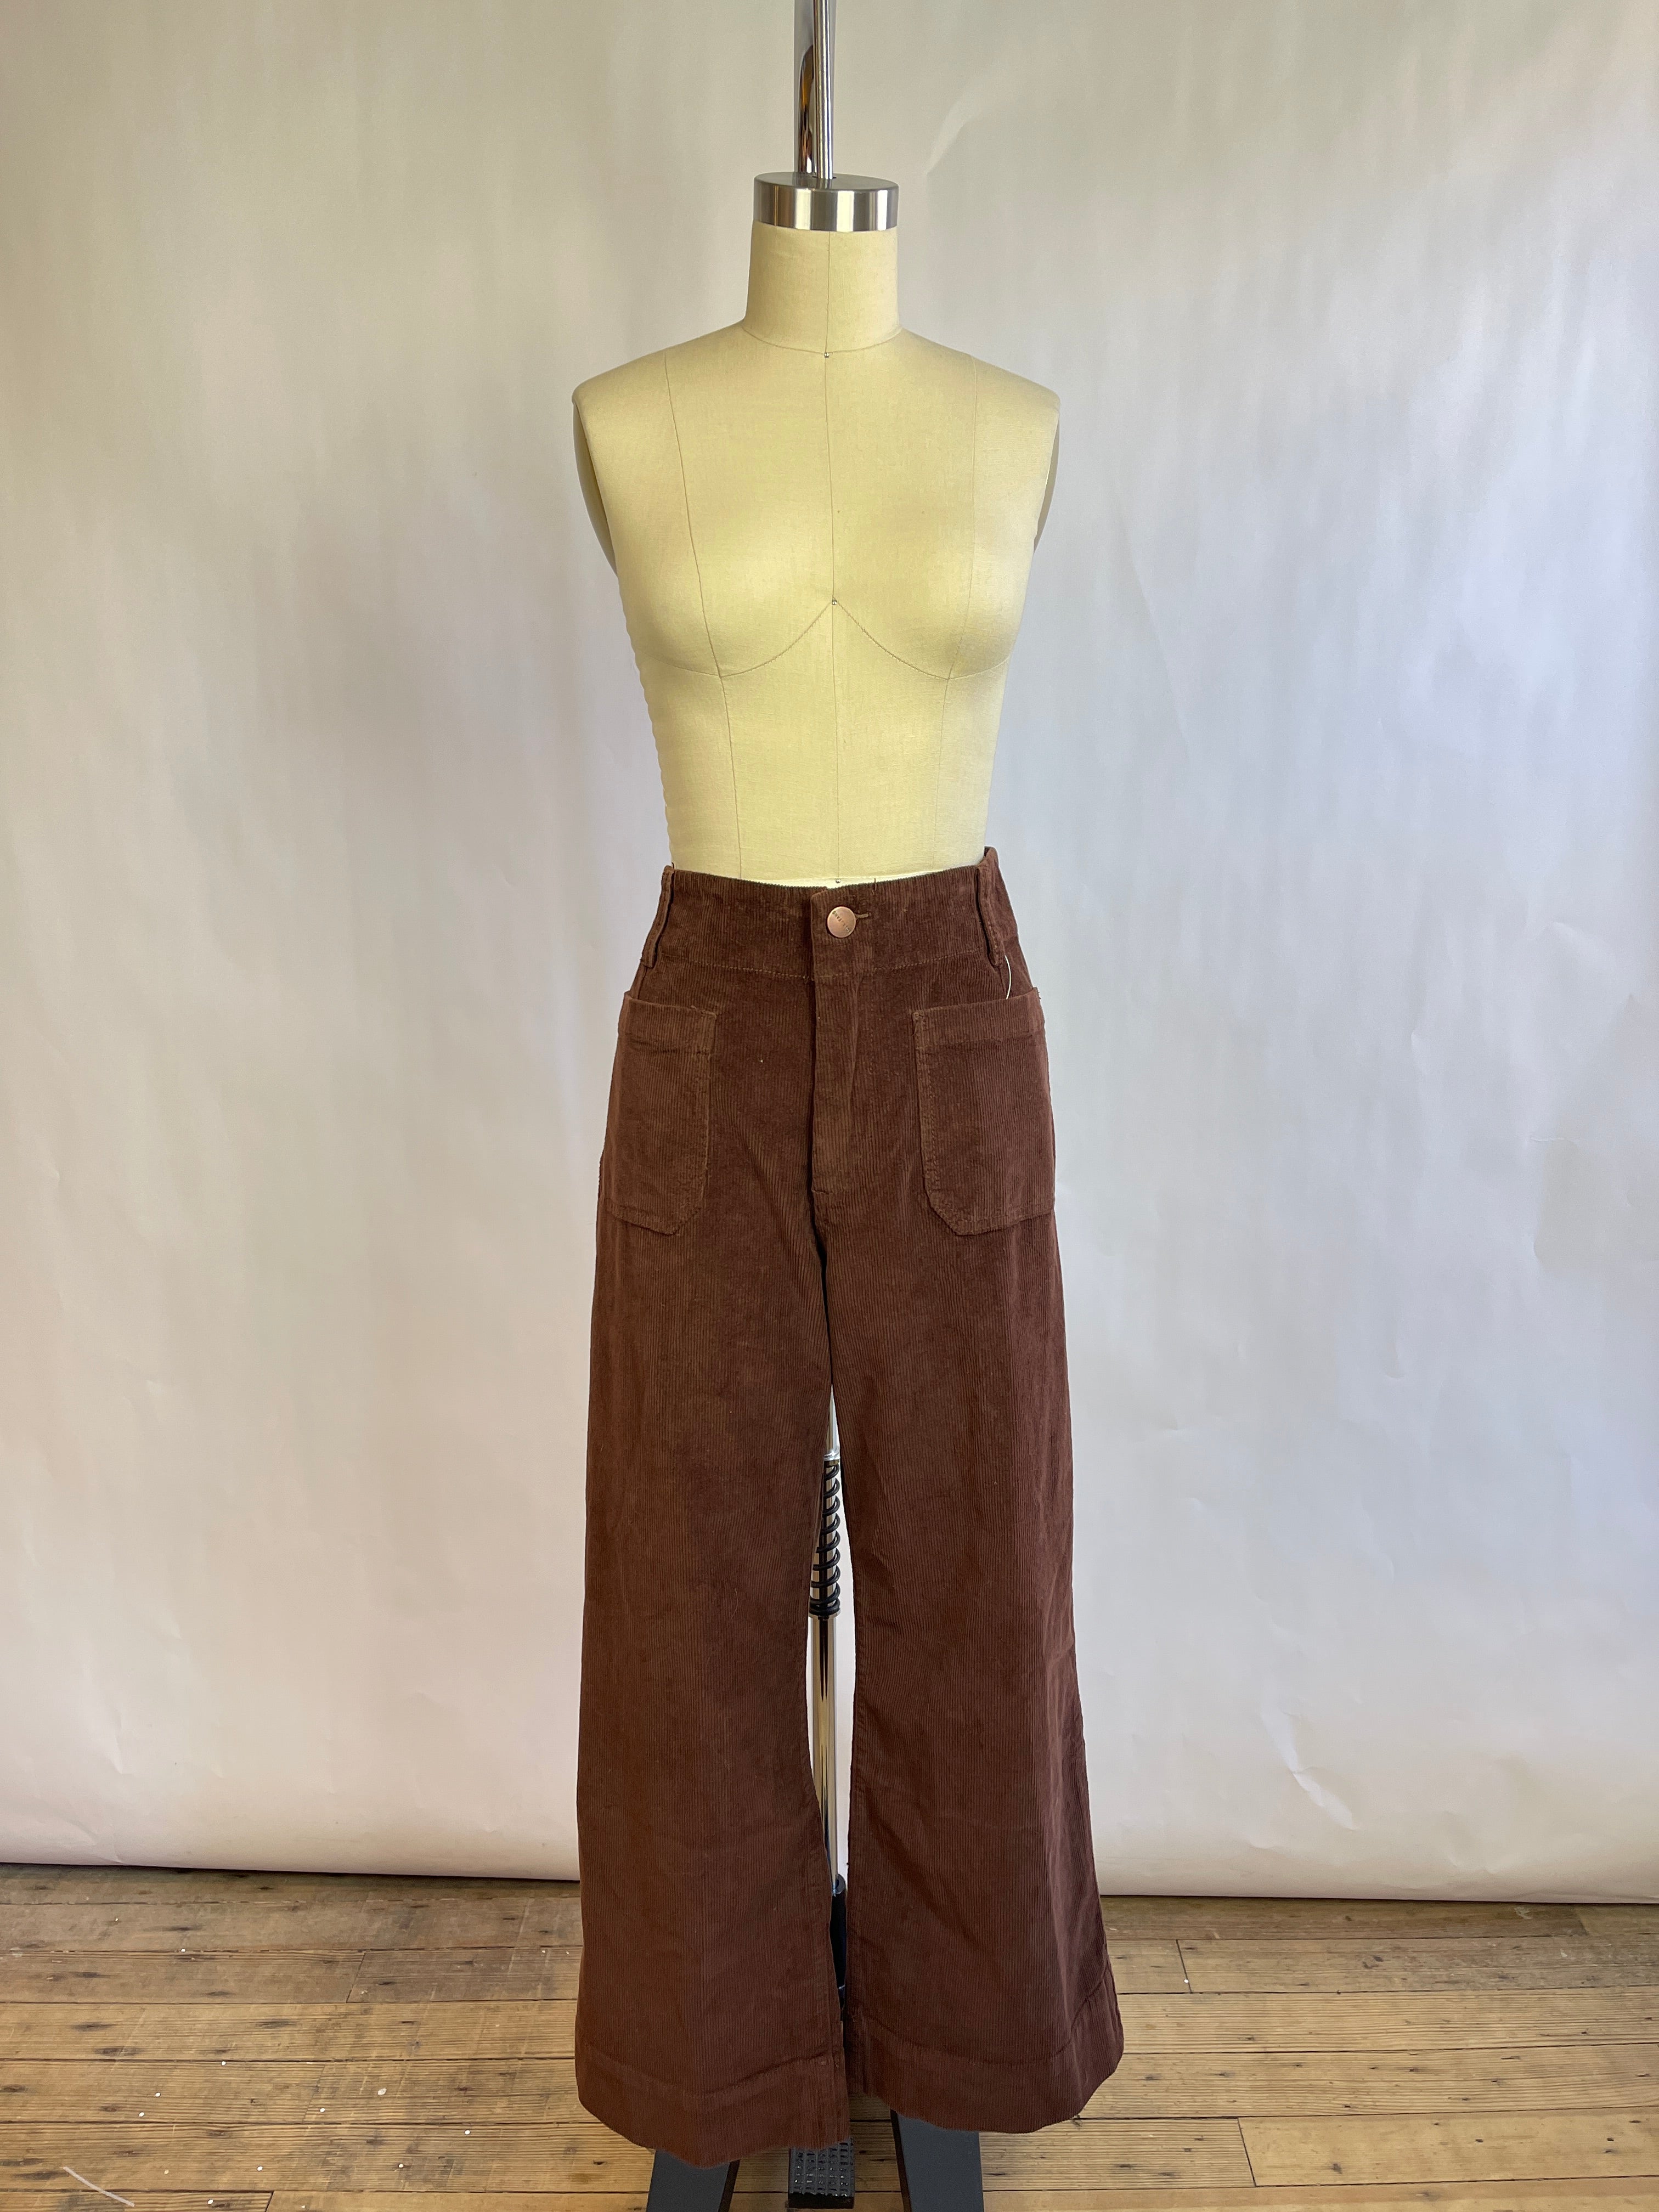 Lola Jeans Brown Cords (12/31)